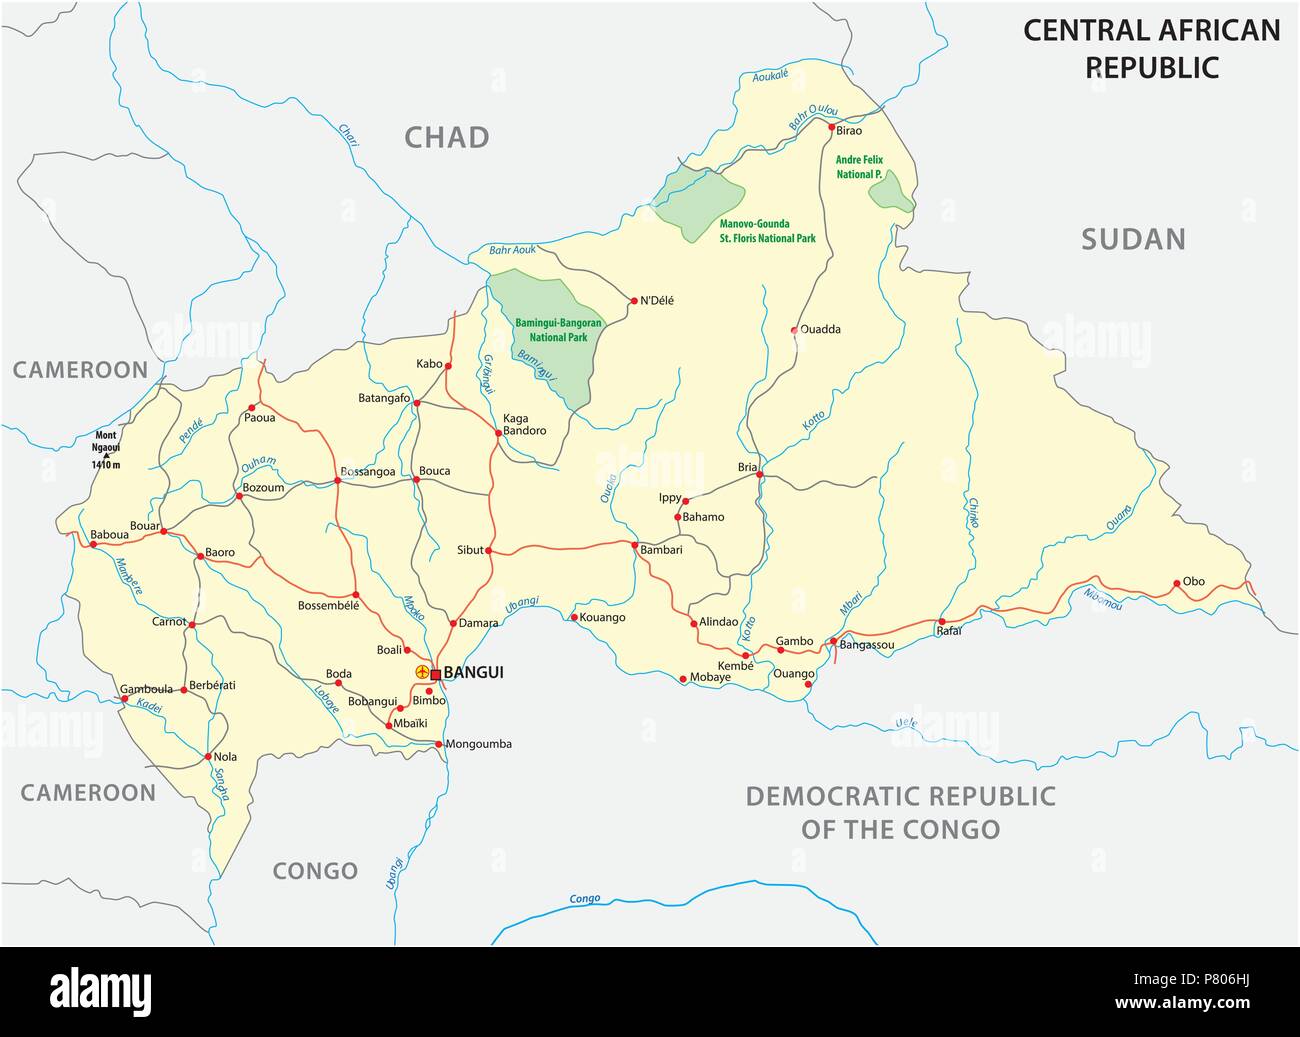 central african republic road vector map Stock Vector